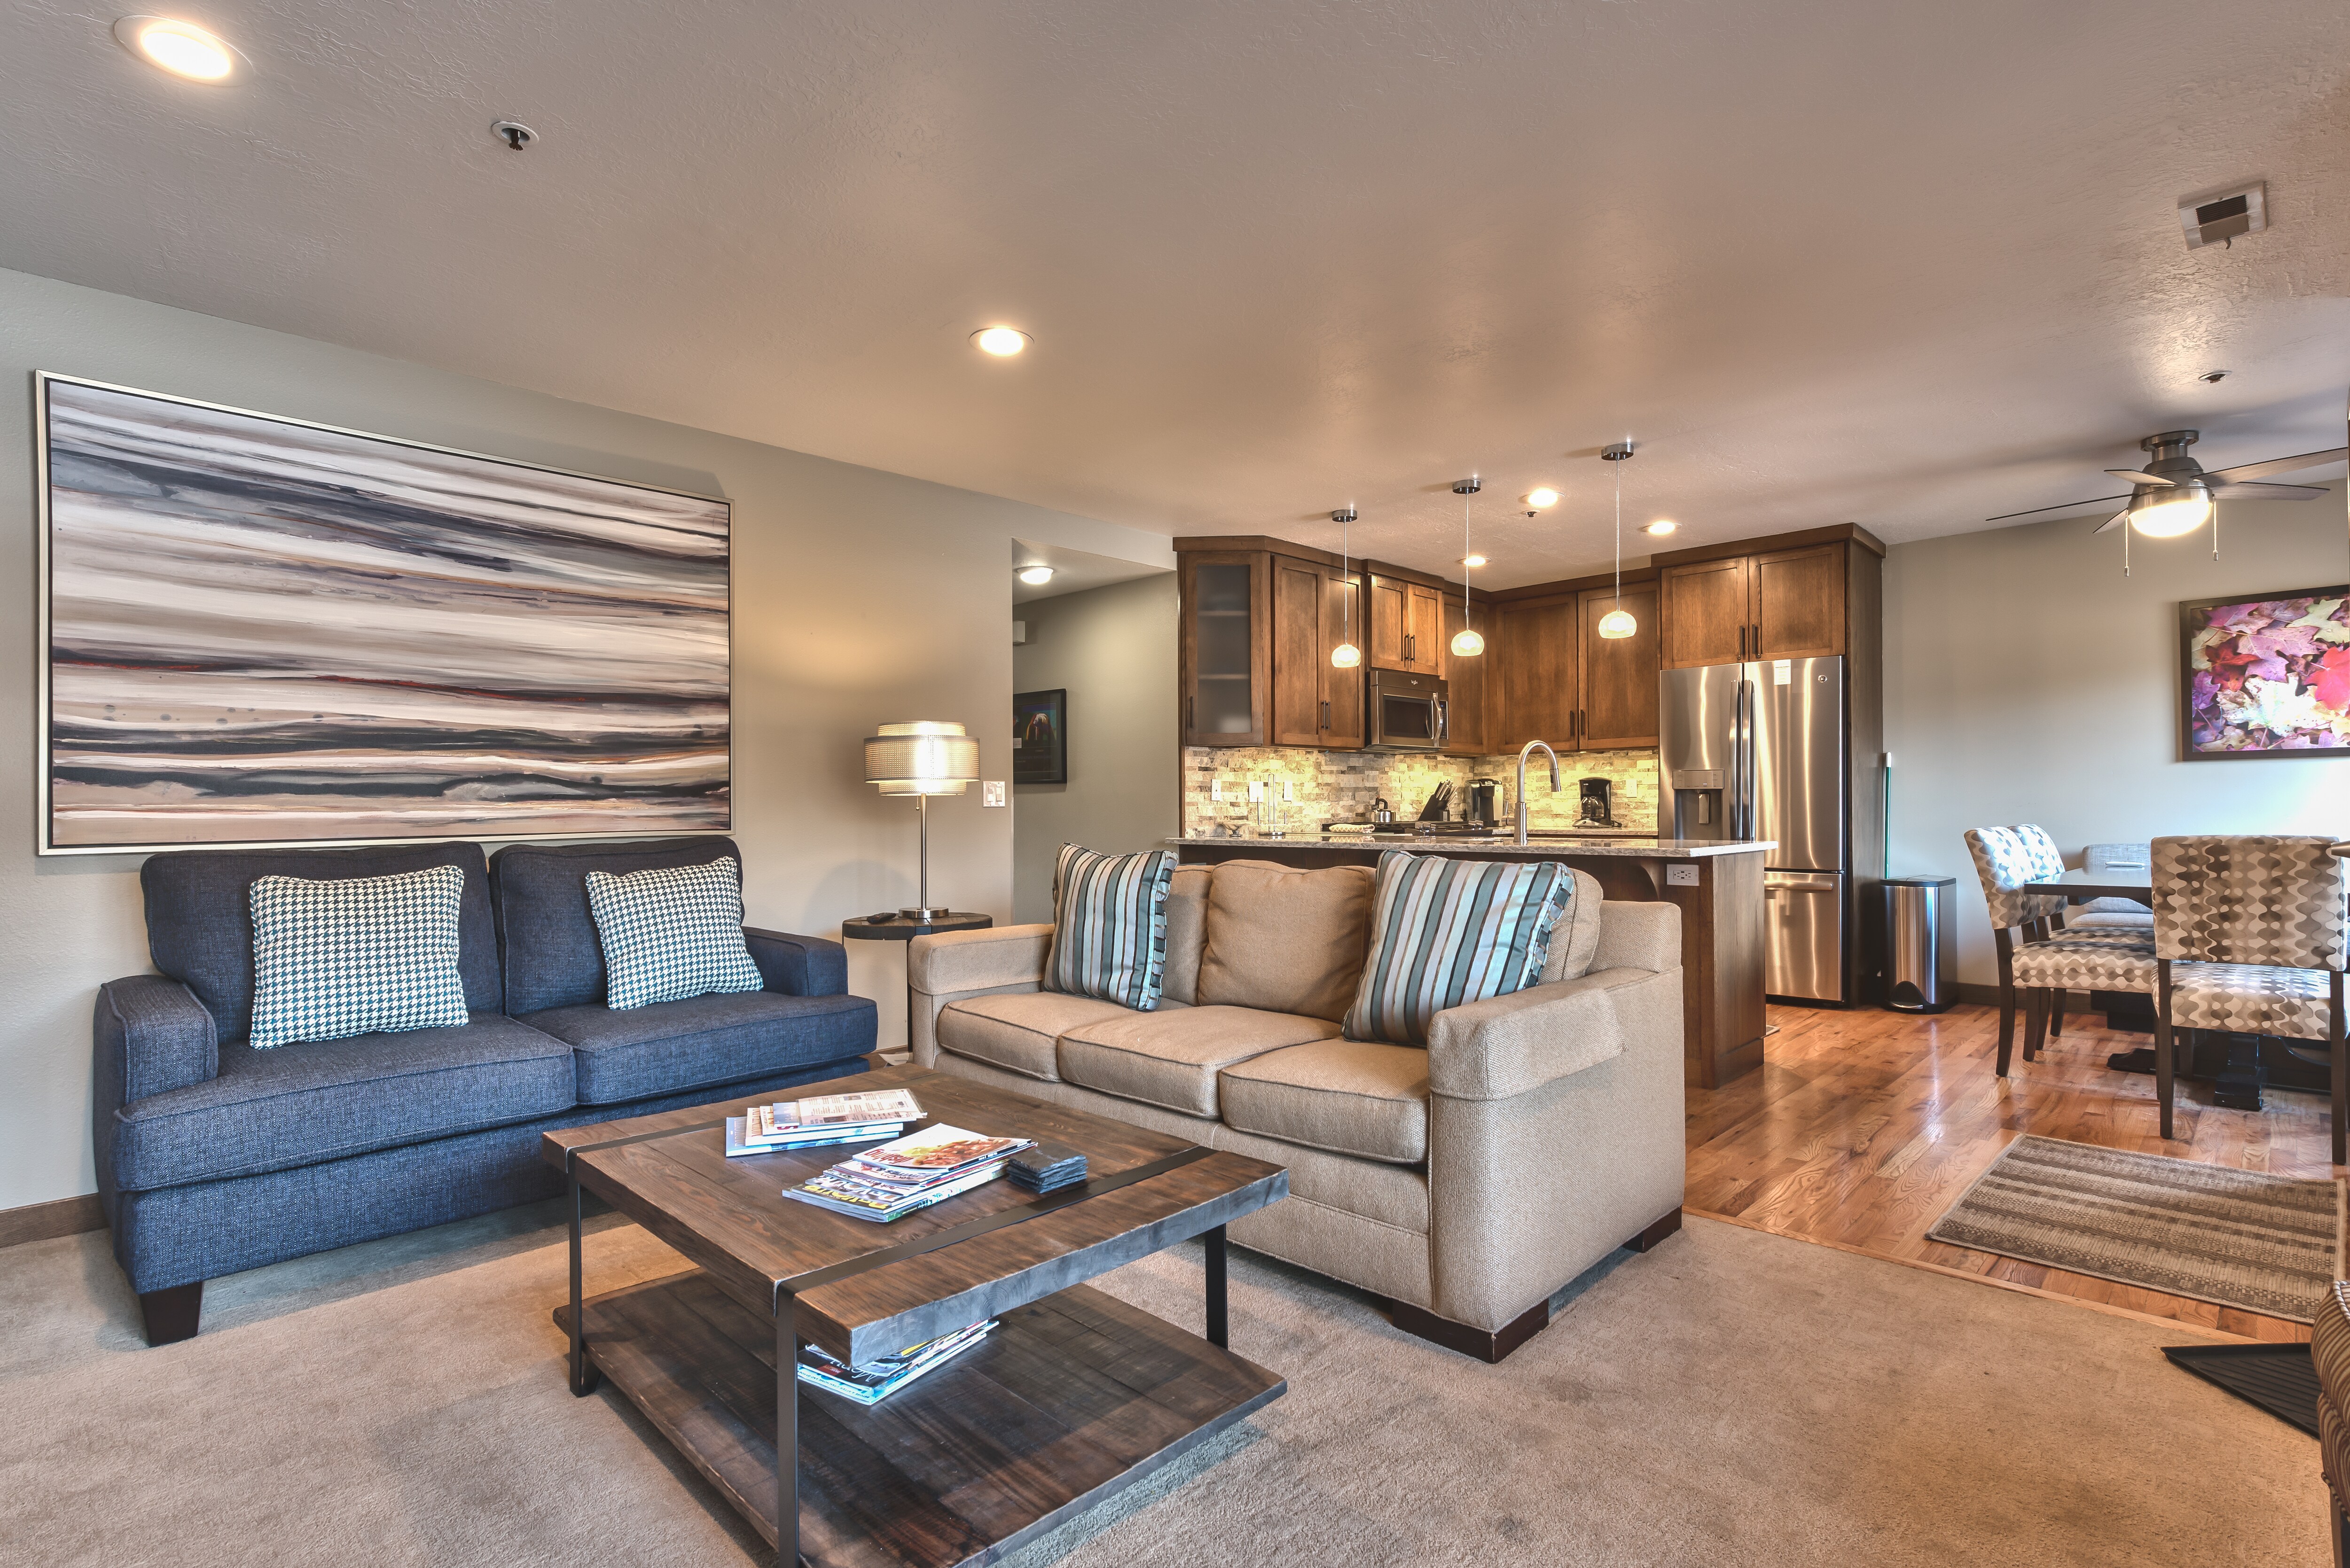 Newly Remodeled Park City All Seasons - Great Room - Living Room, Kitchen and Dining Area